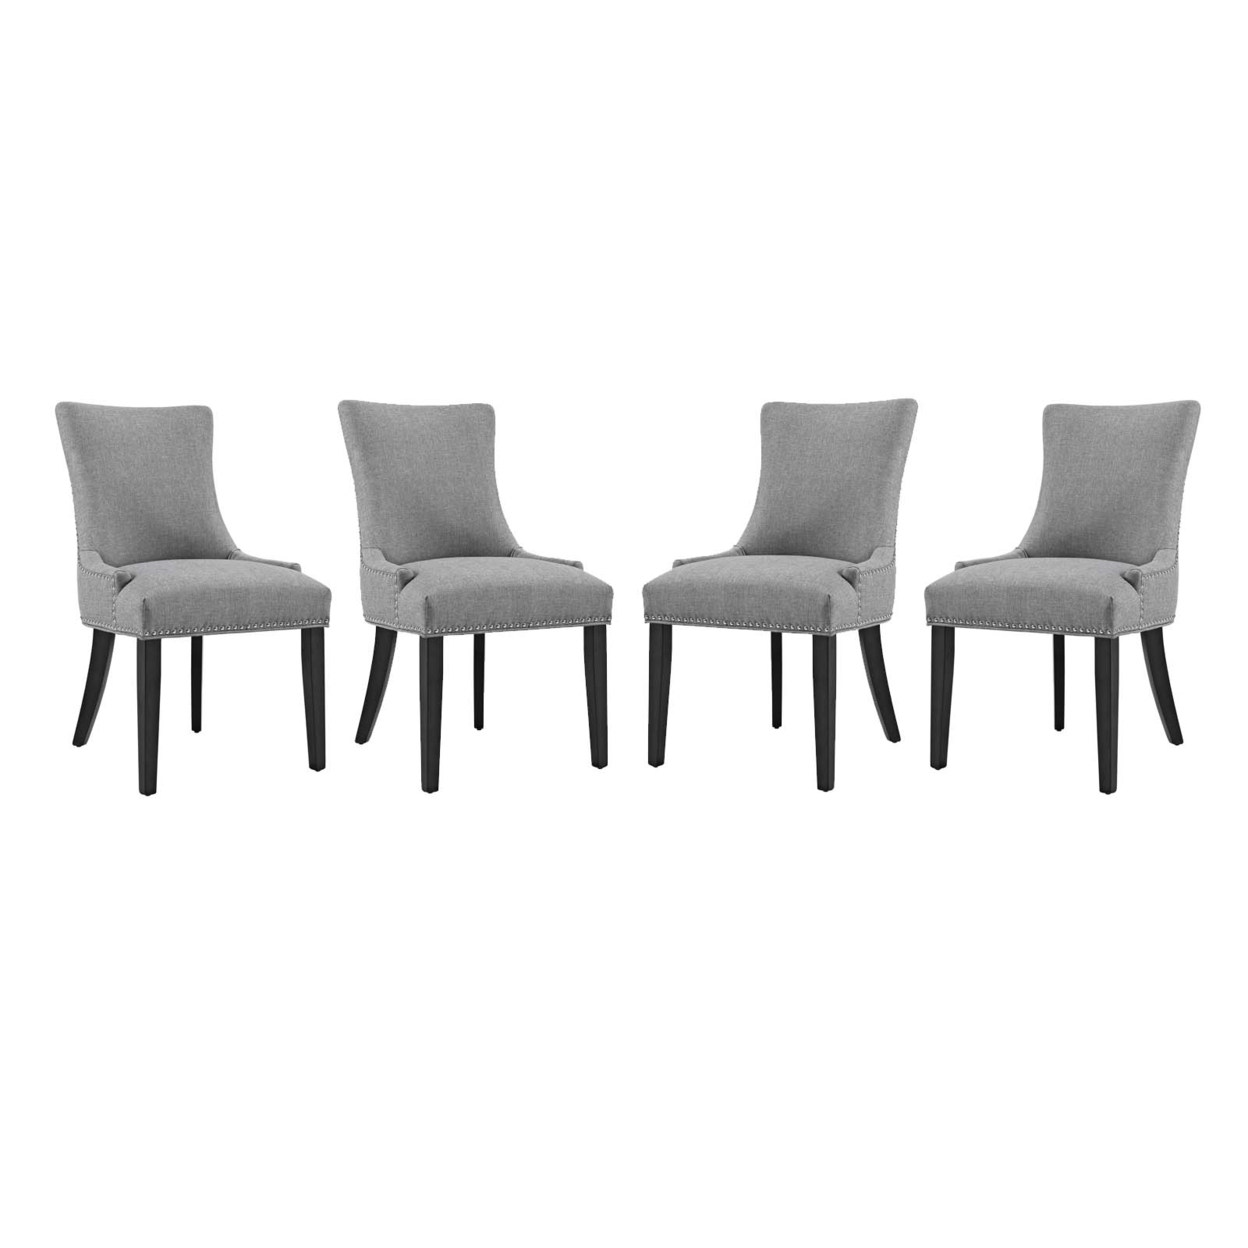 Marquis Dining Chair Fabric Set Of 4, Light Gray